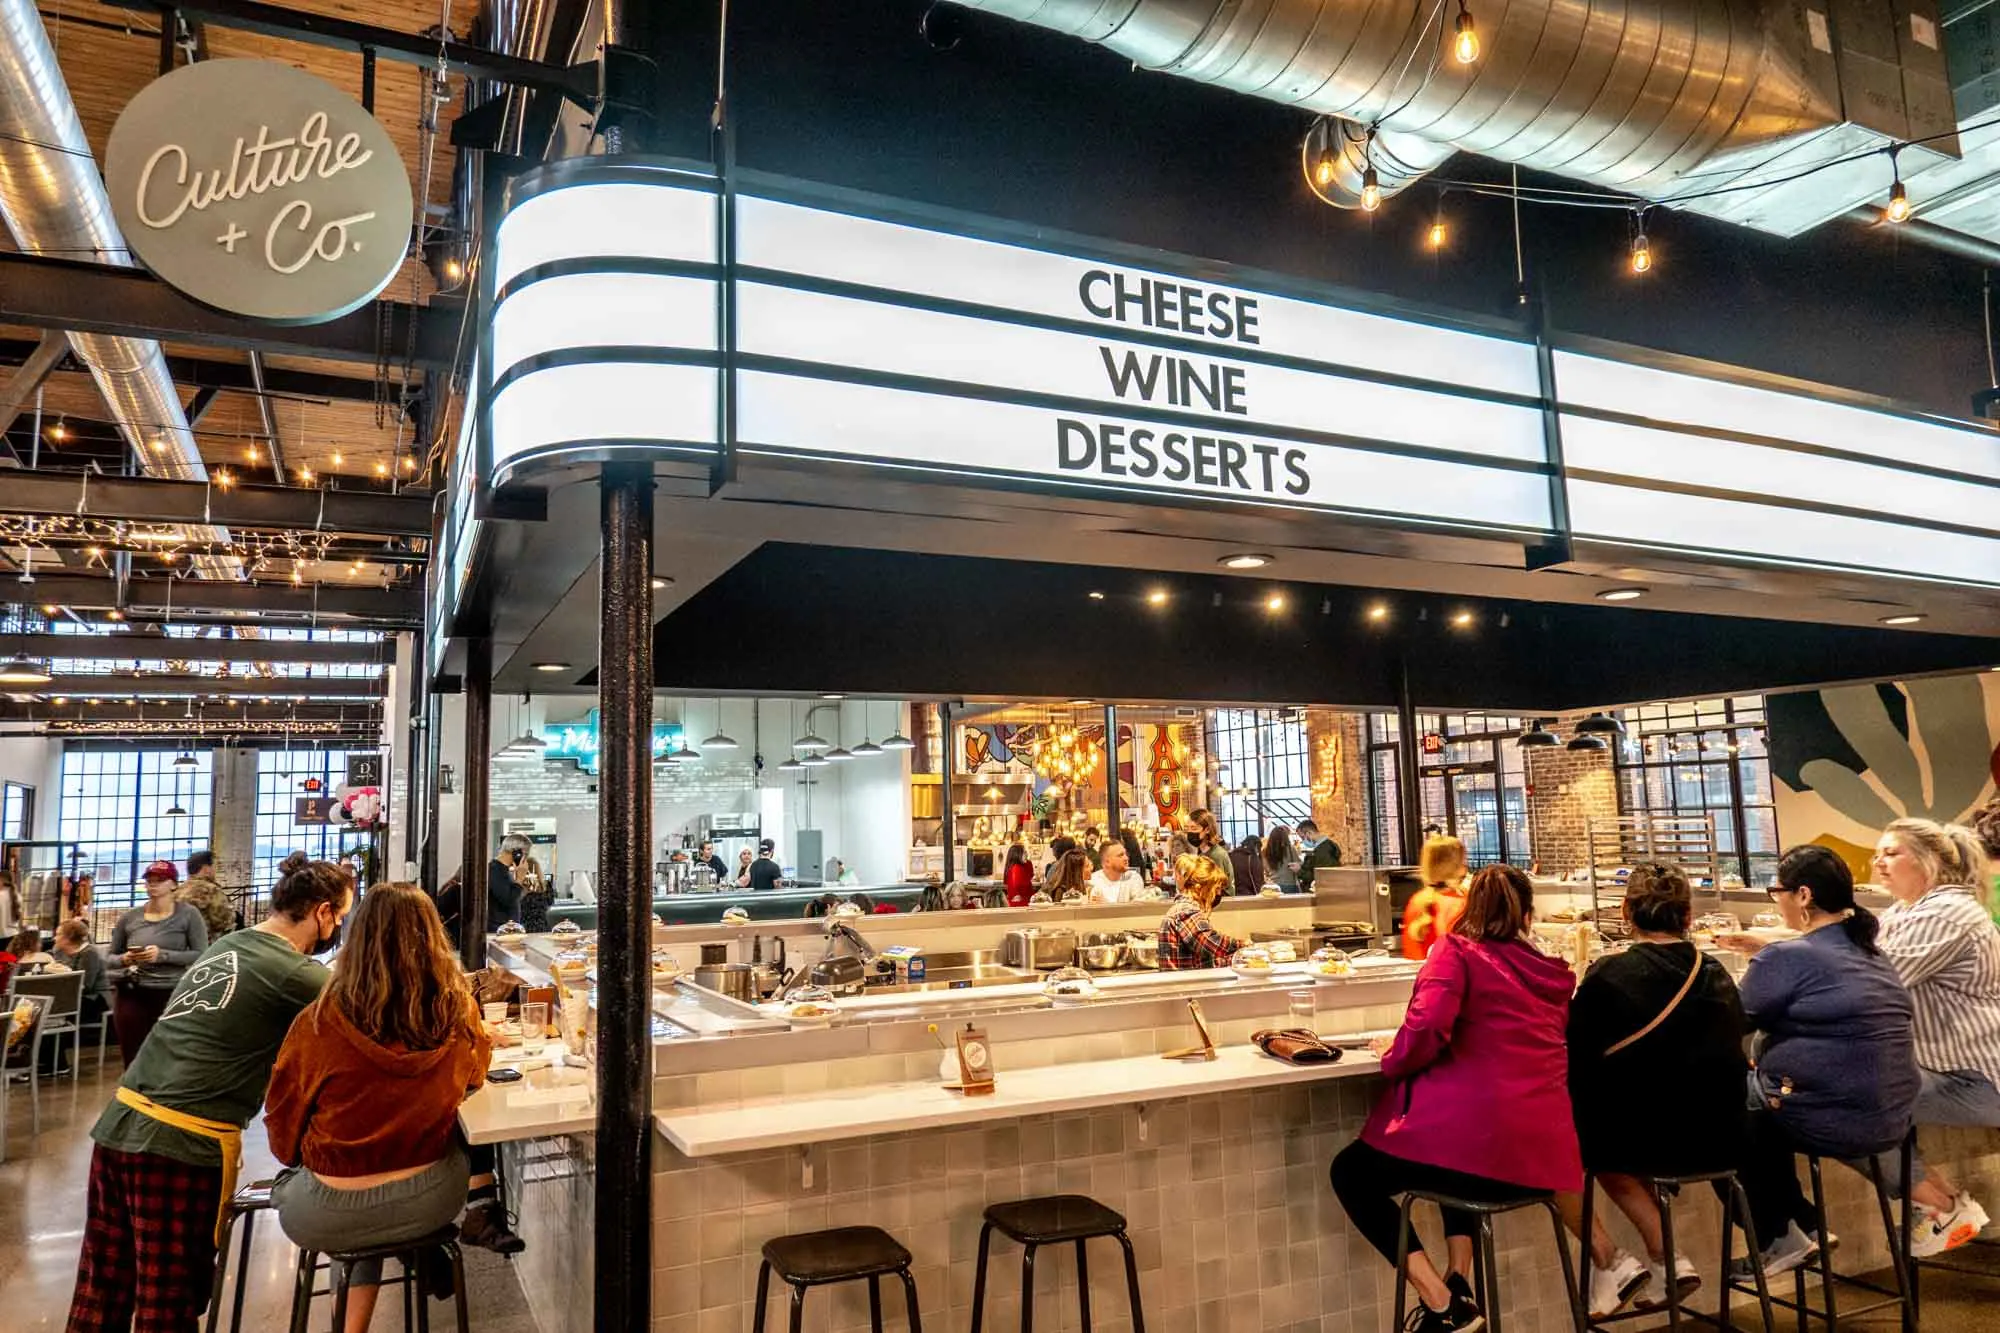 People sitting at a counter under a sign for "Culture + Co.: Cheese, Wine, Desserts."